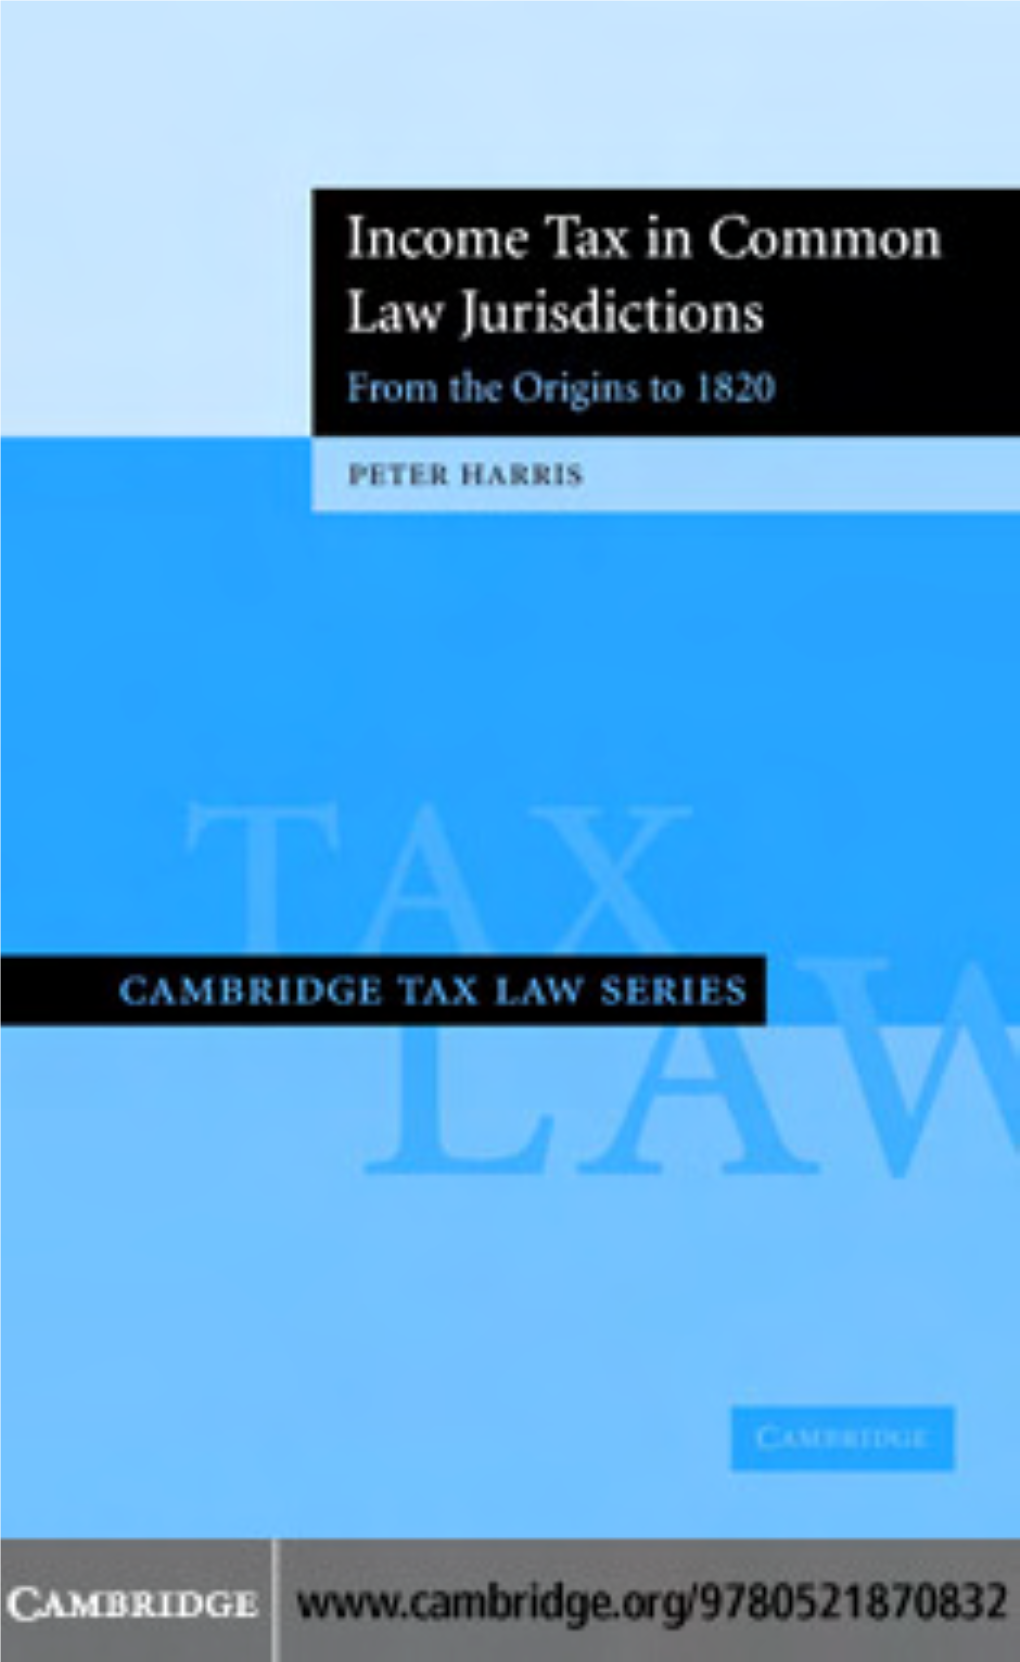 INCOME TAX in COMMON LAW JURISDICTIONS: from the Origins